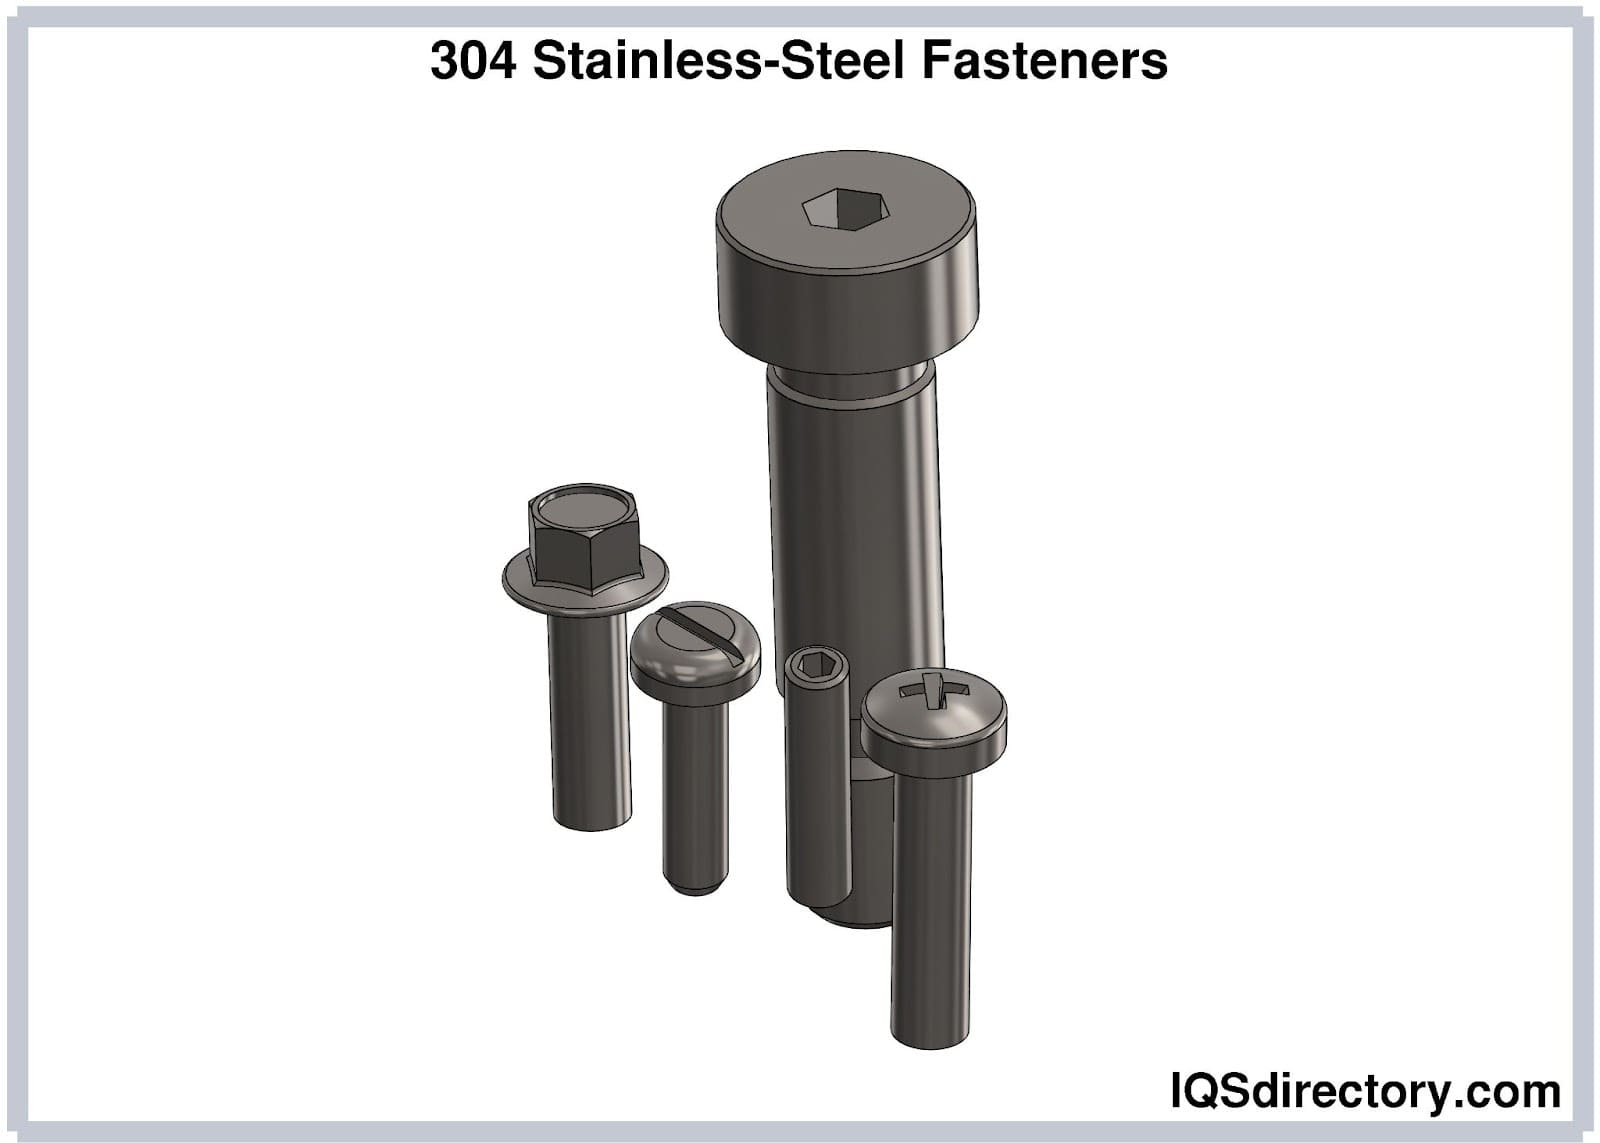 304-Stainless-Steel Fasteners